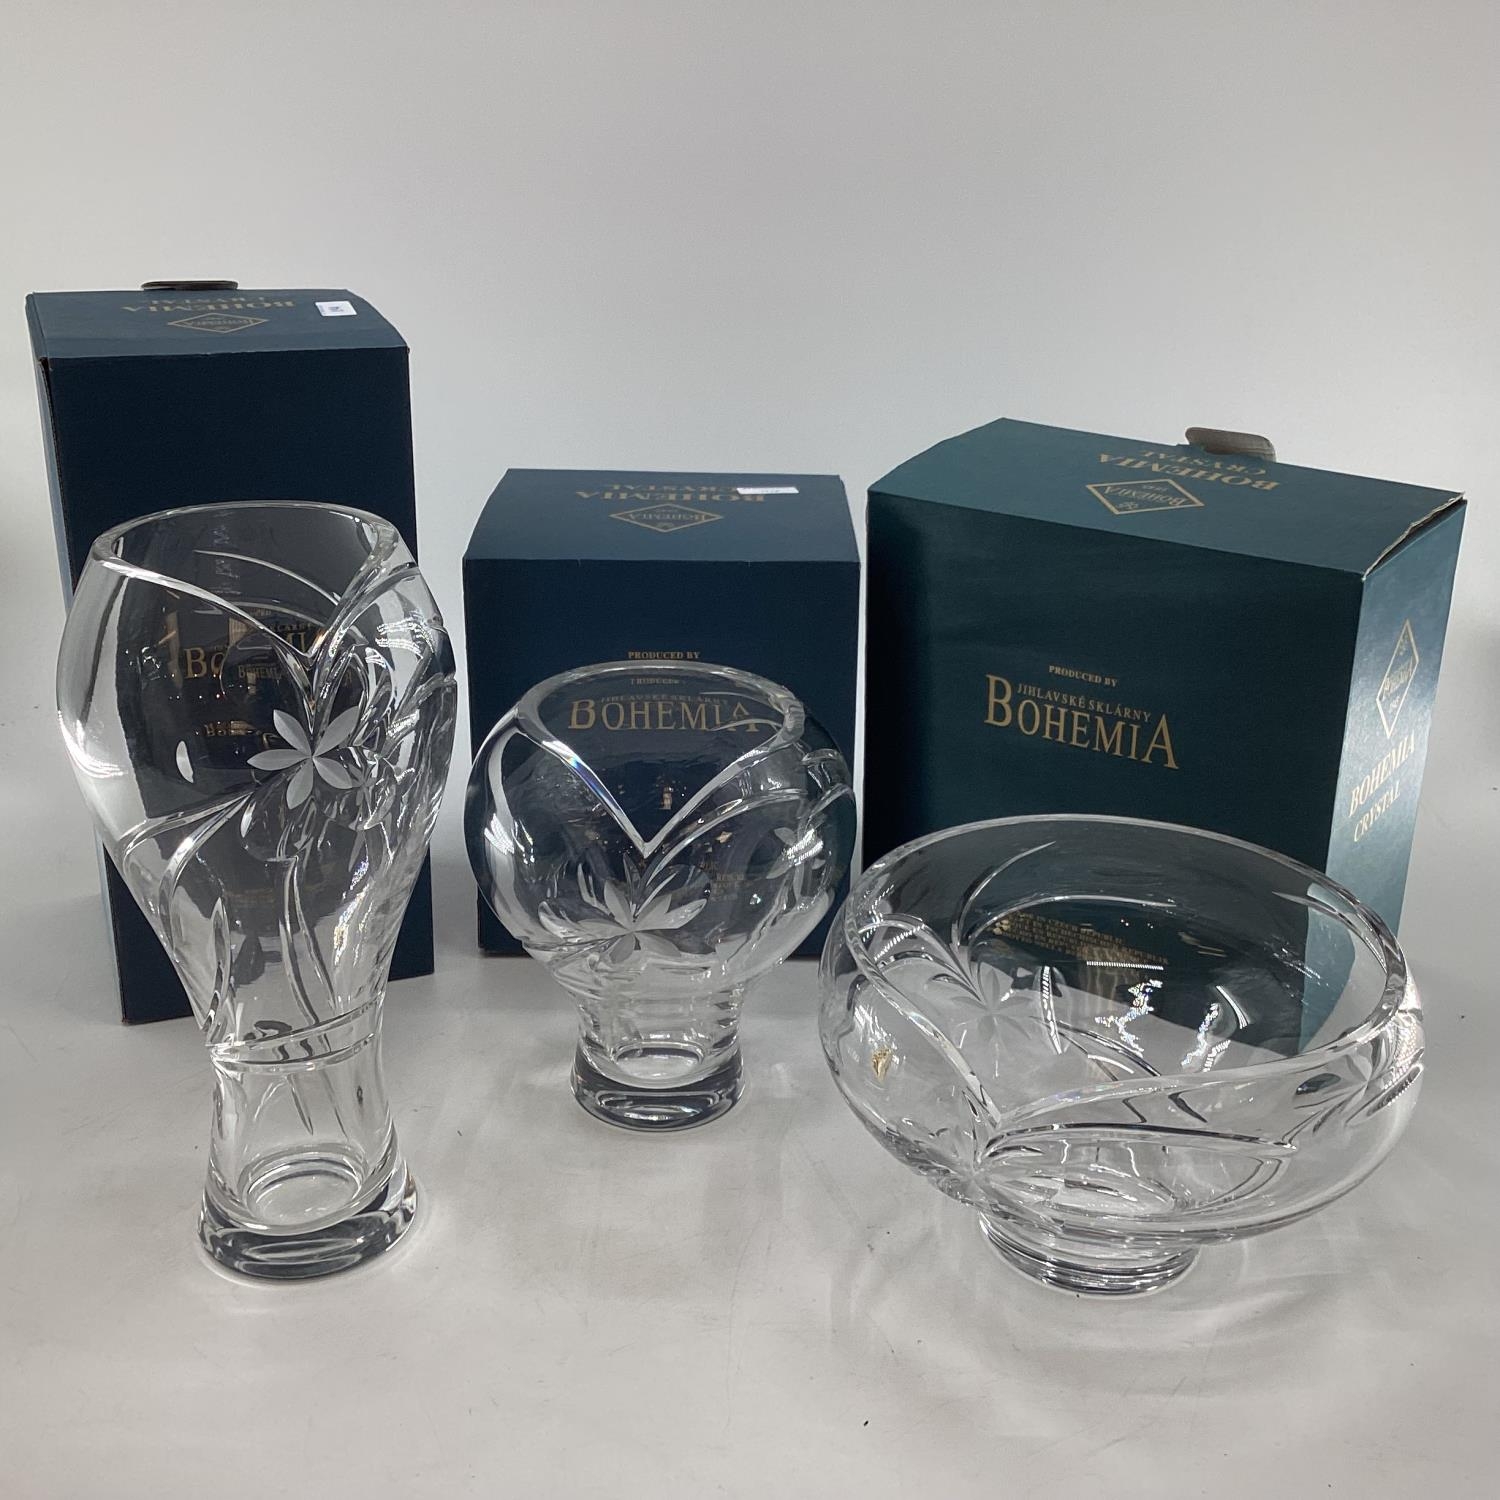 Three boxed Bohemia glass crystal items, two vases and a bowl - Image 2 of 6